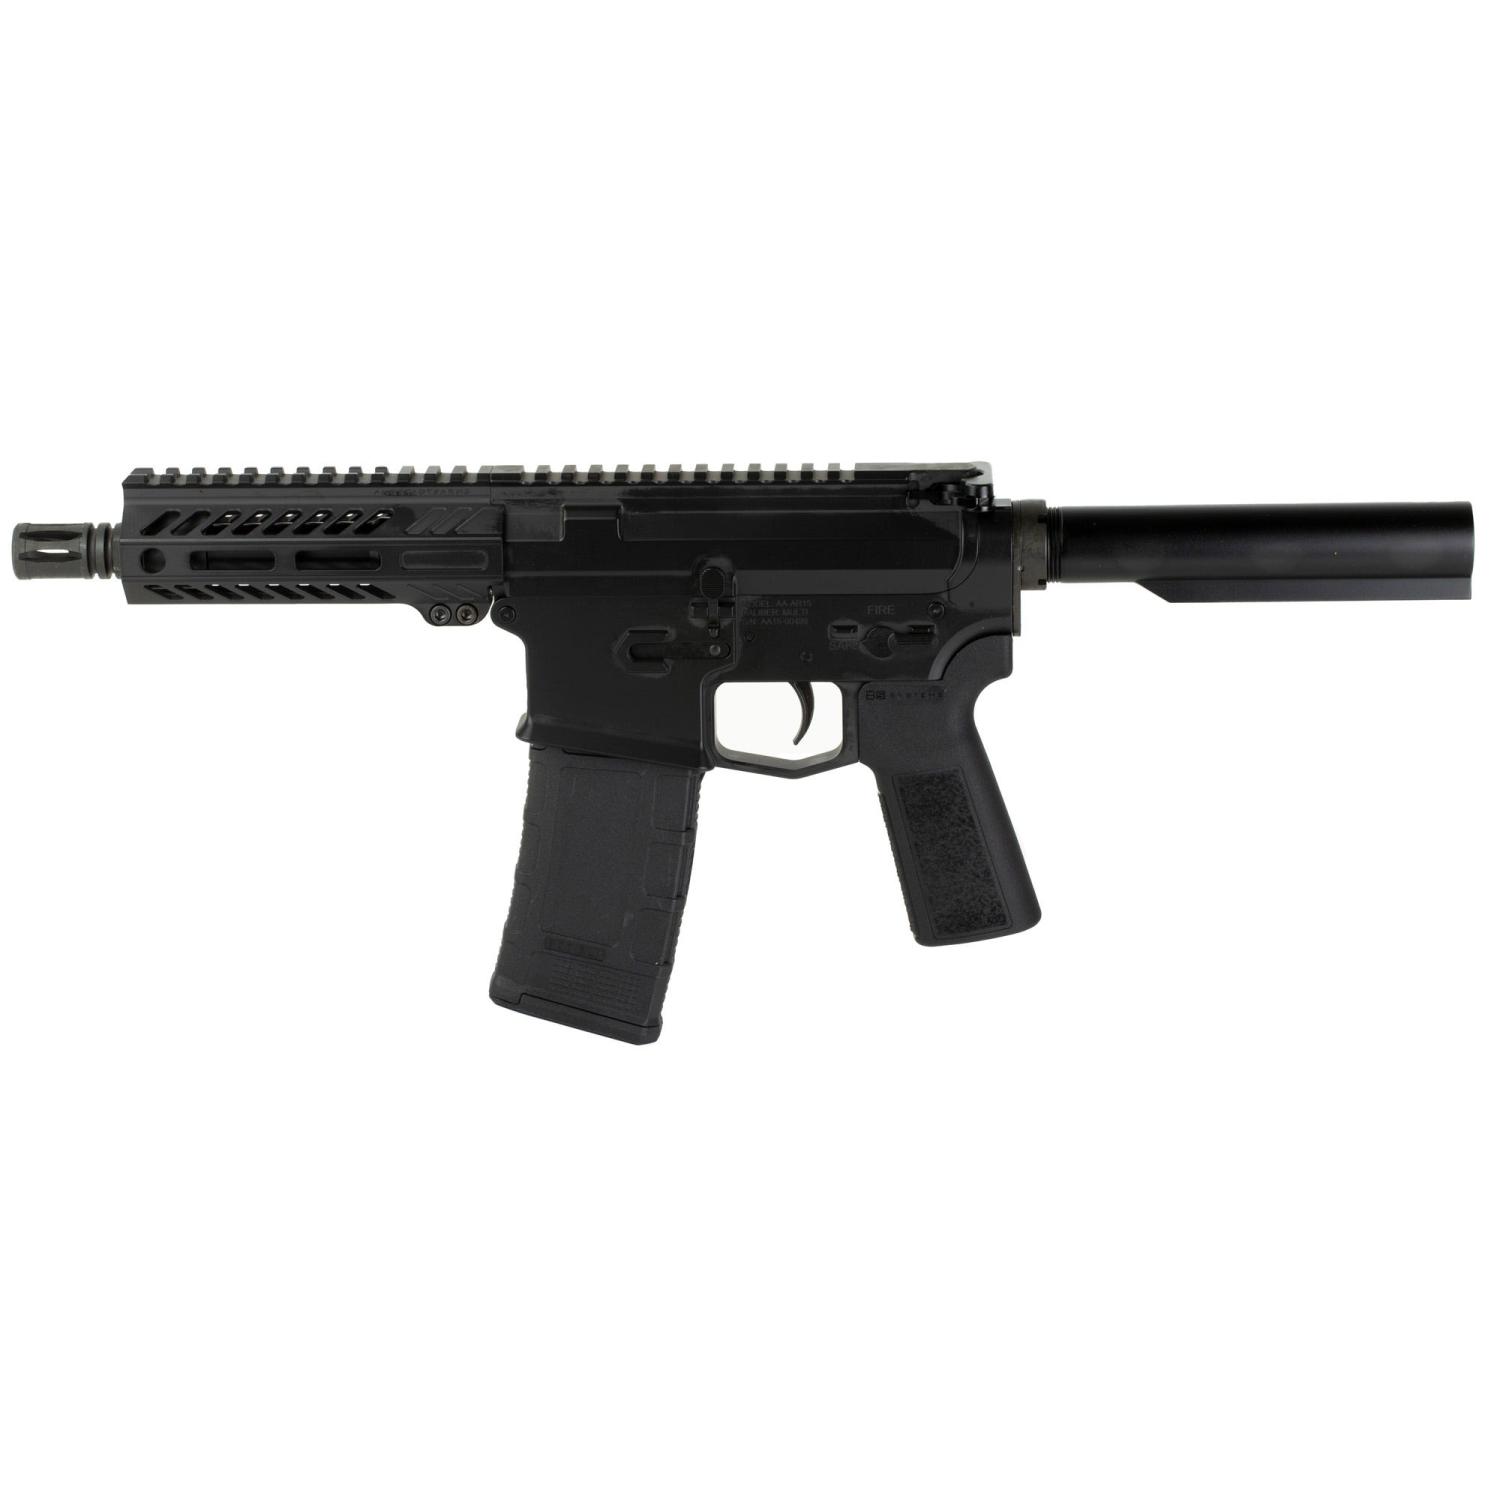 Angstadt Arms UDP-300 Pistol .300 AAC Blackout 6" Barrel 30-Rounds - $1343.99 (Grab A Quote) ($7.99 S/H on firearms)